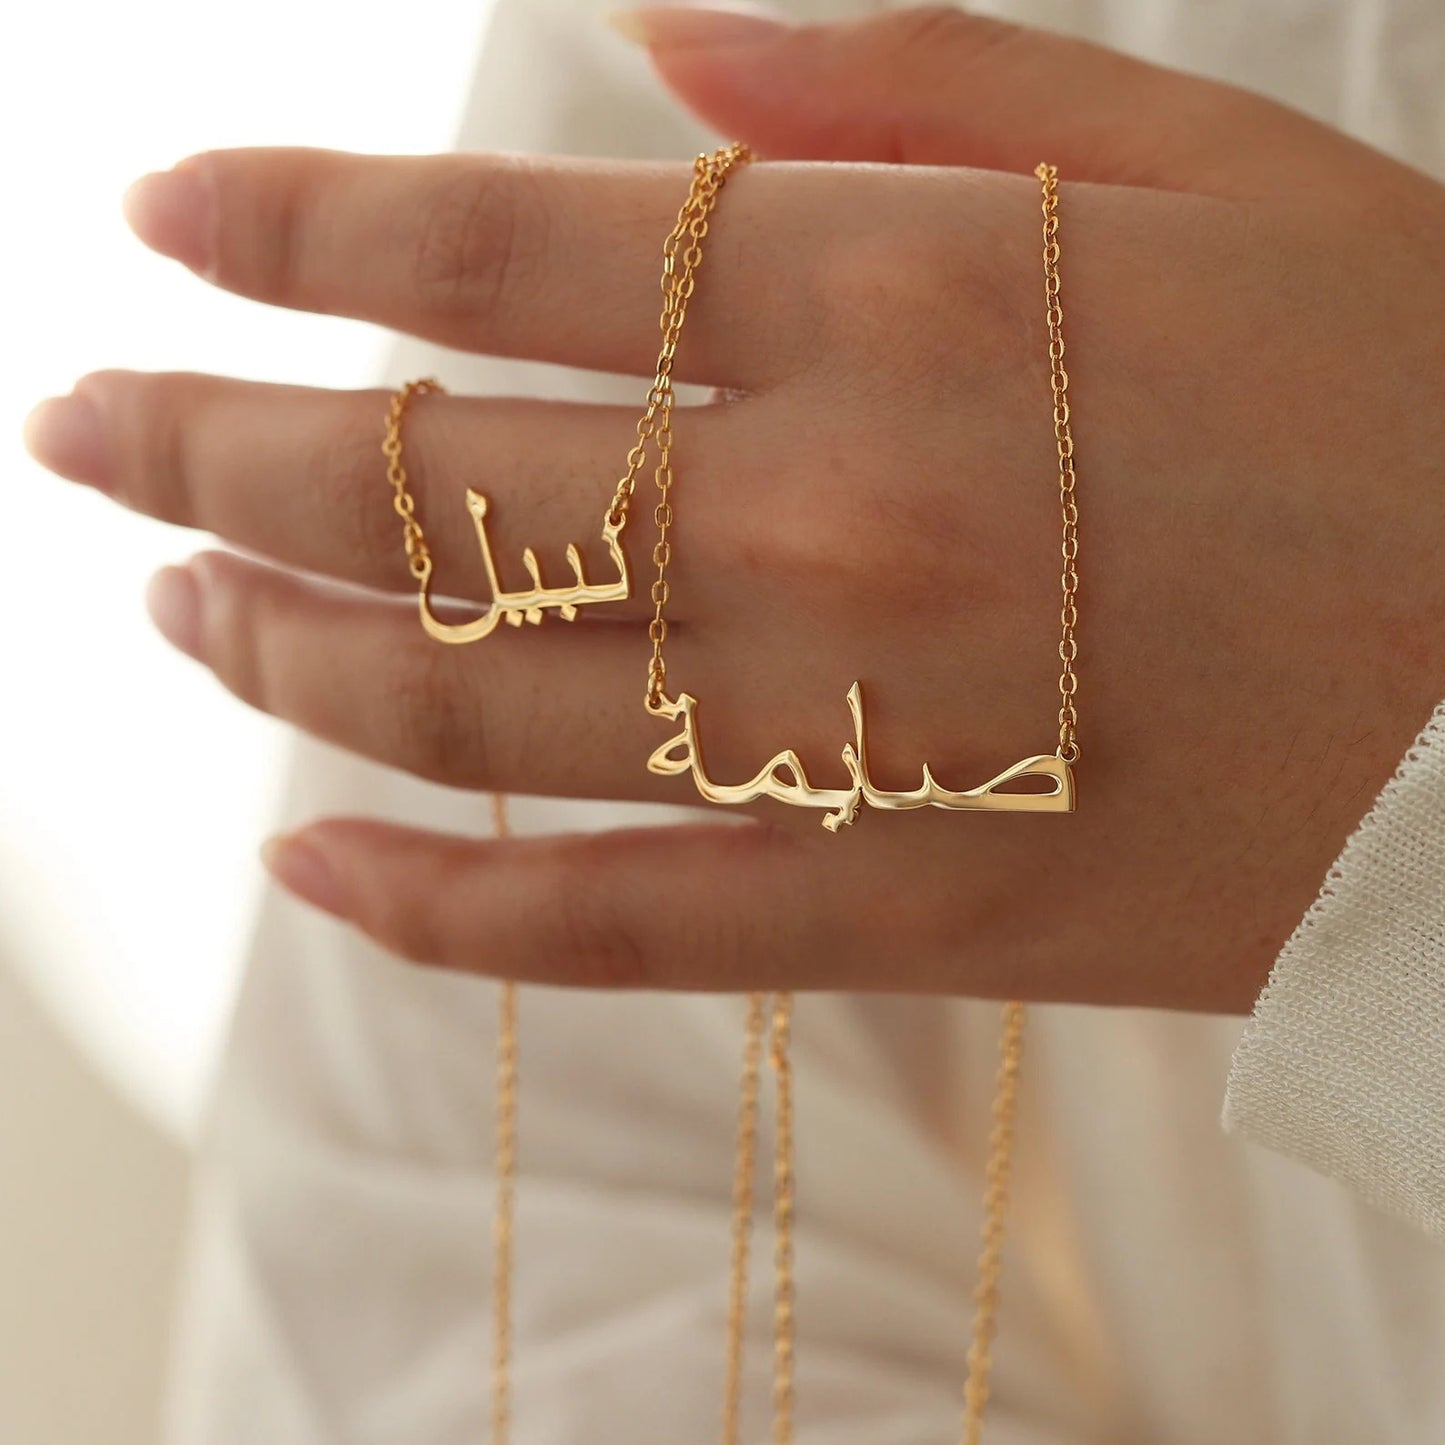 Personal Name Necklace in Arabic